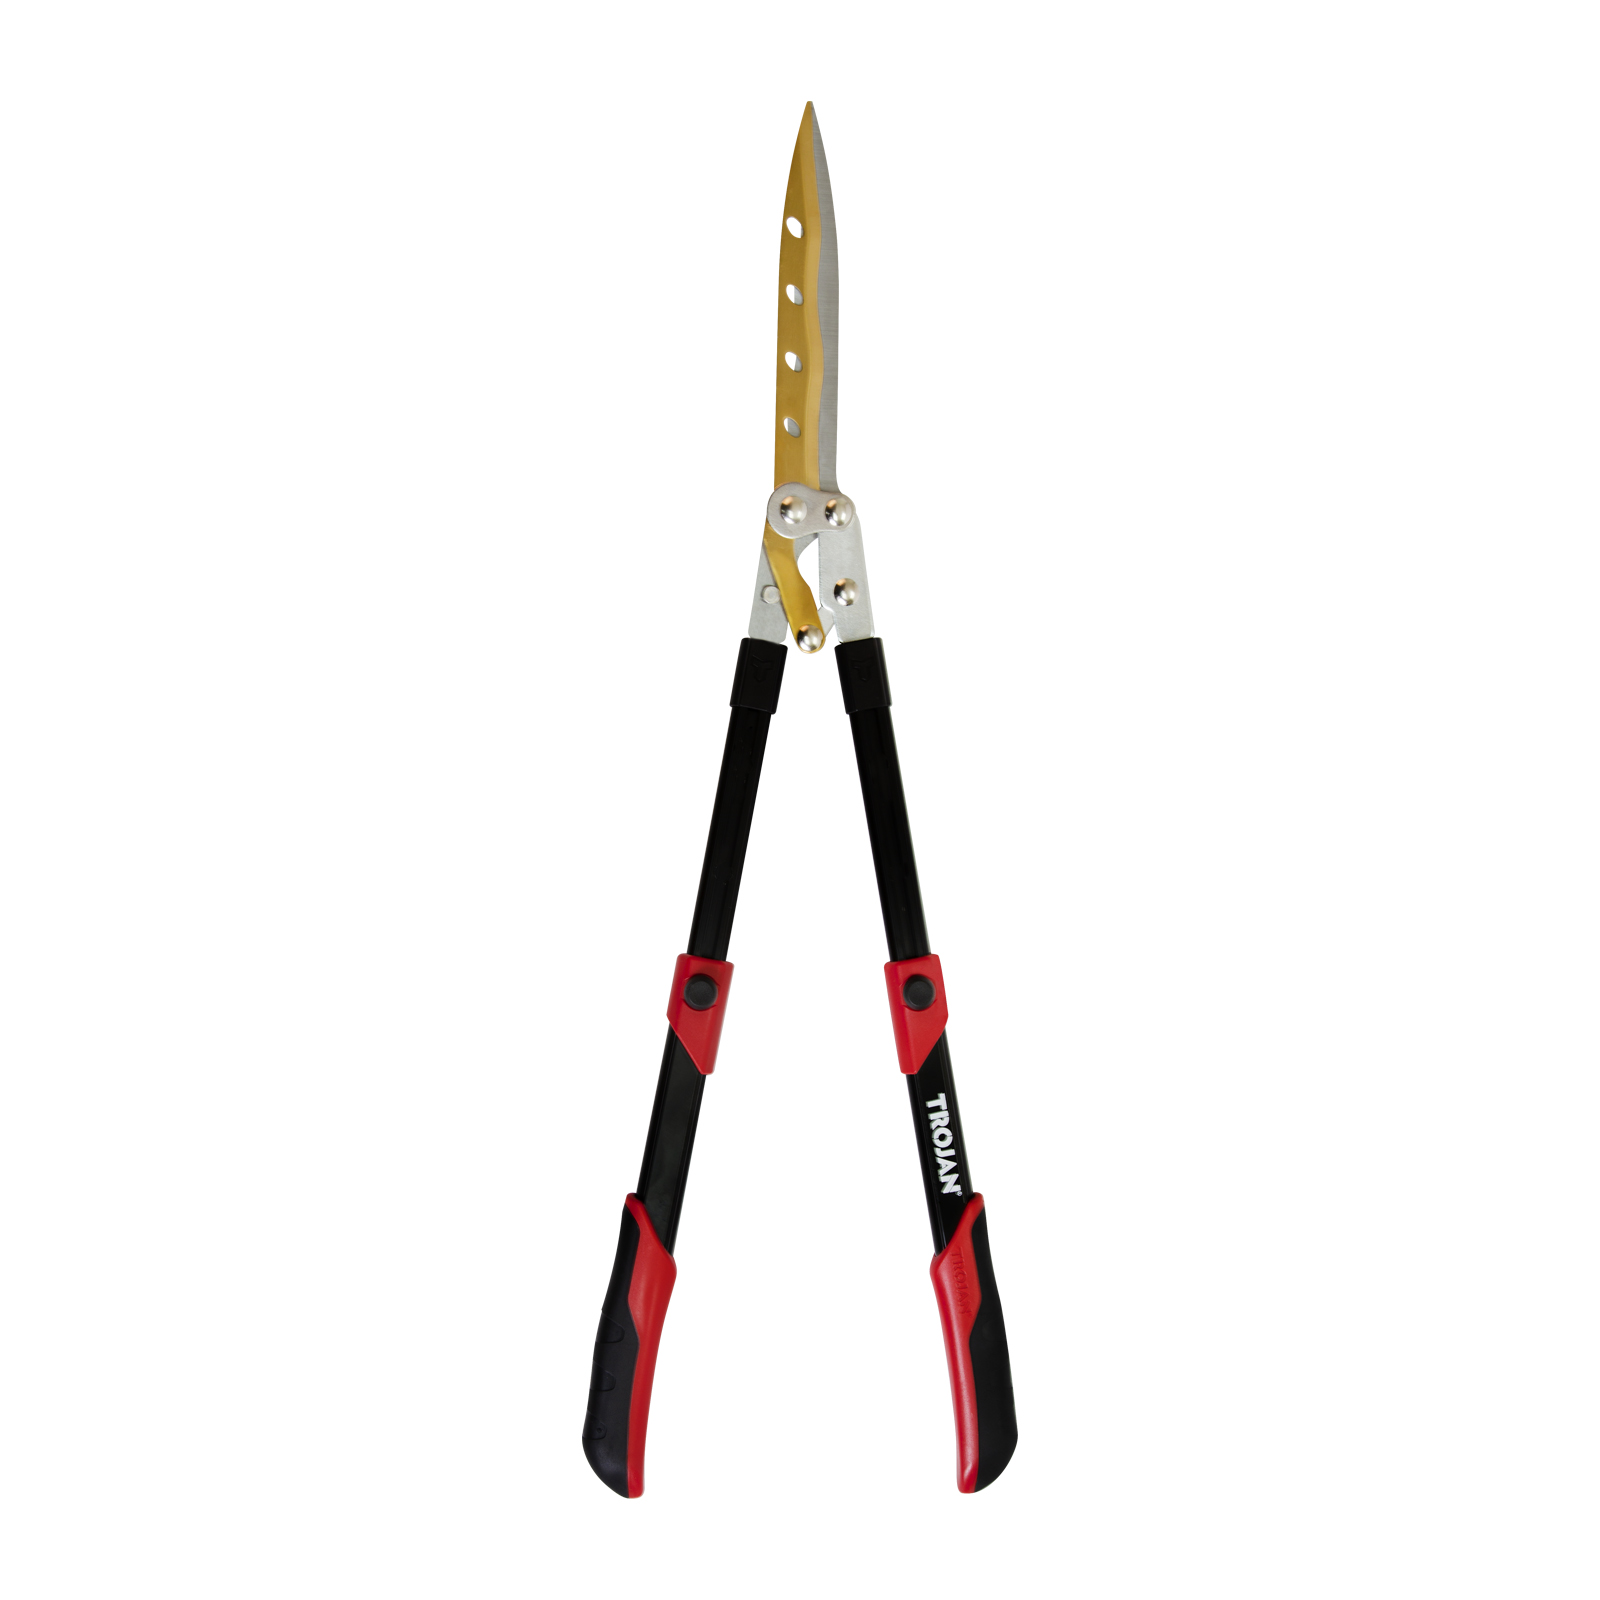 H1 Telescopic One Touch Handle Hedge Shear